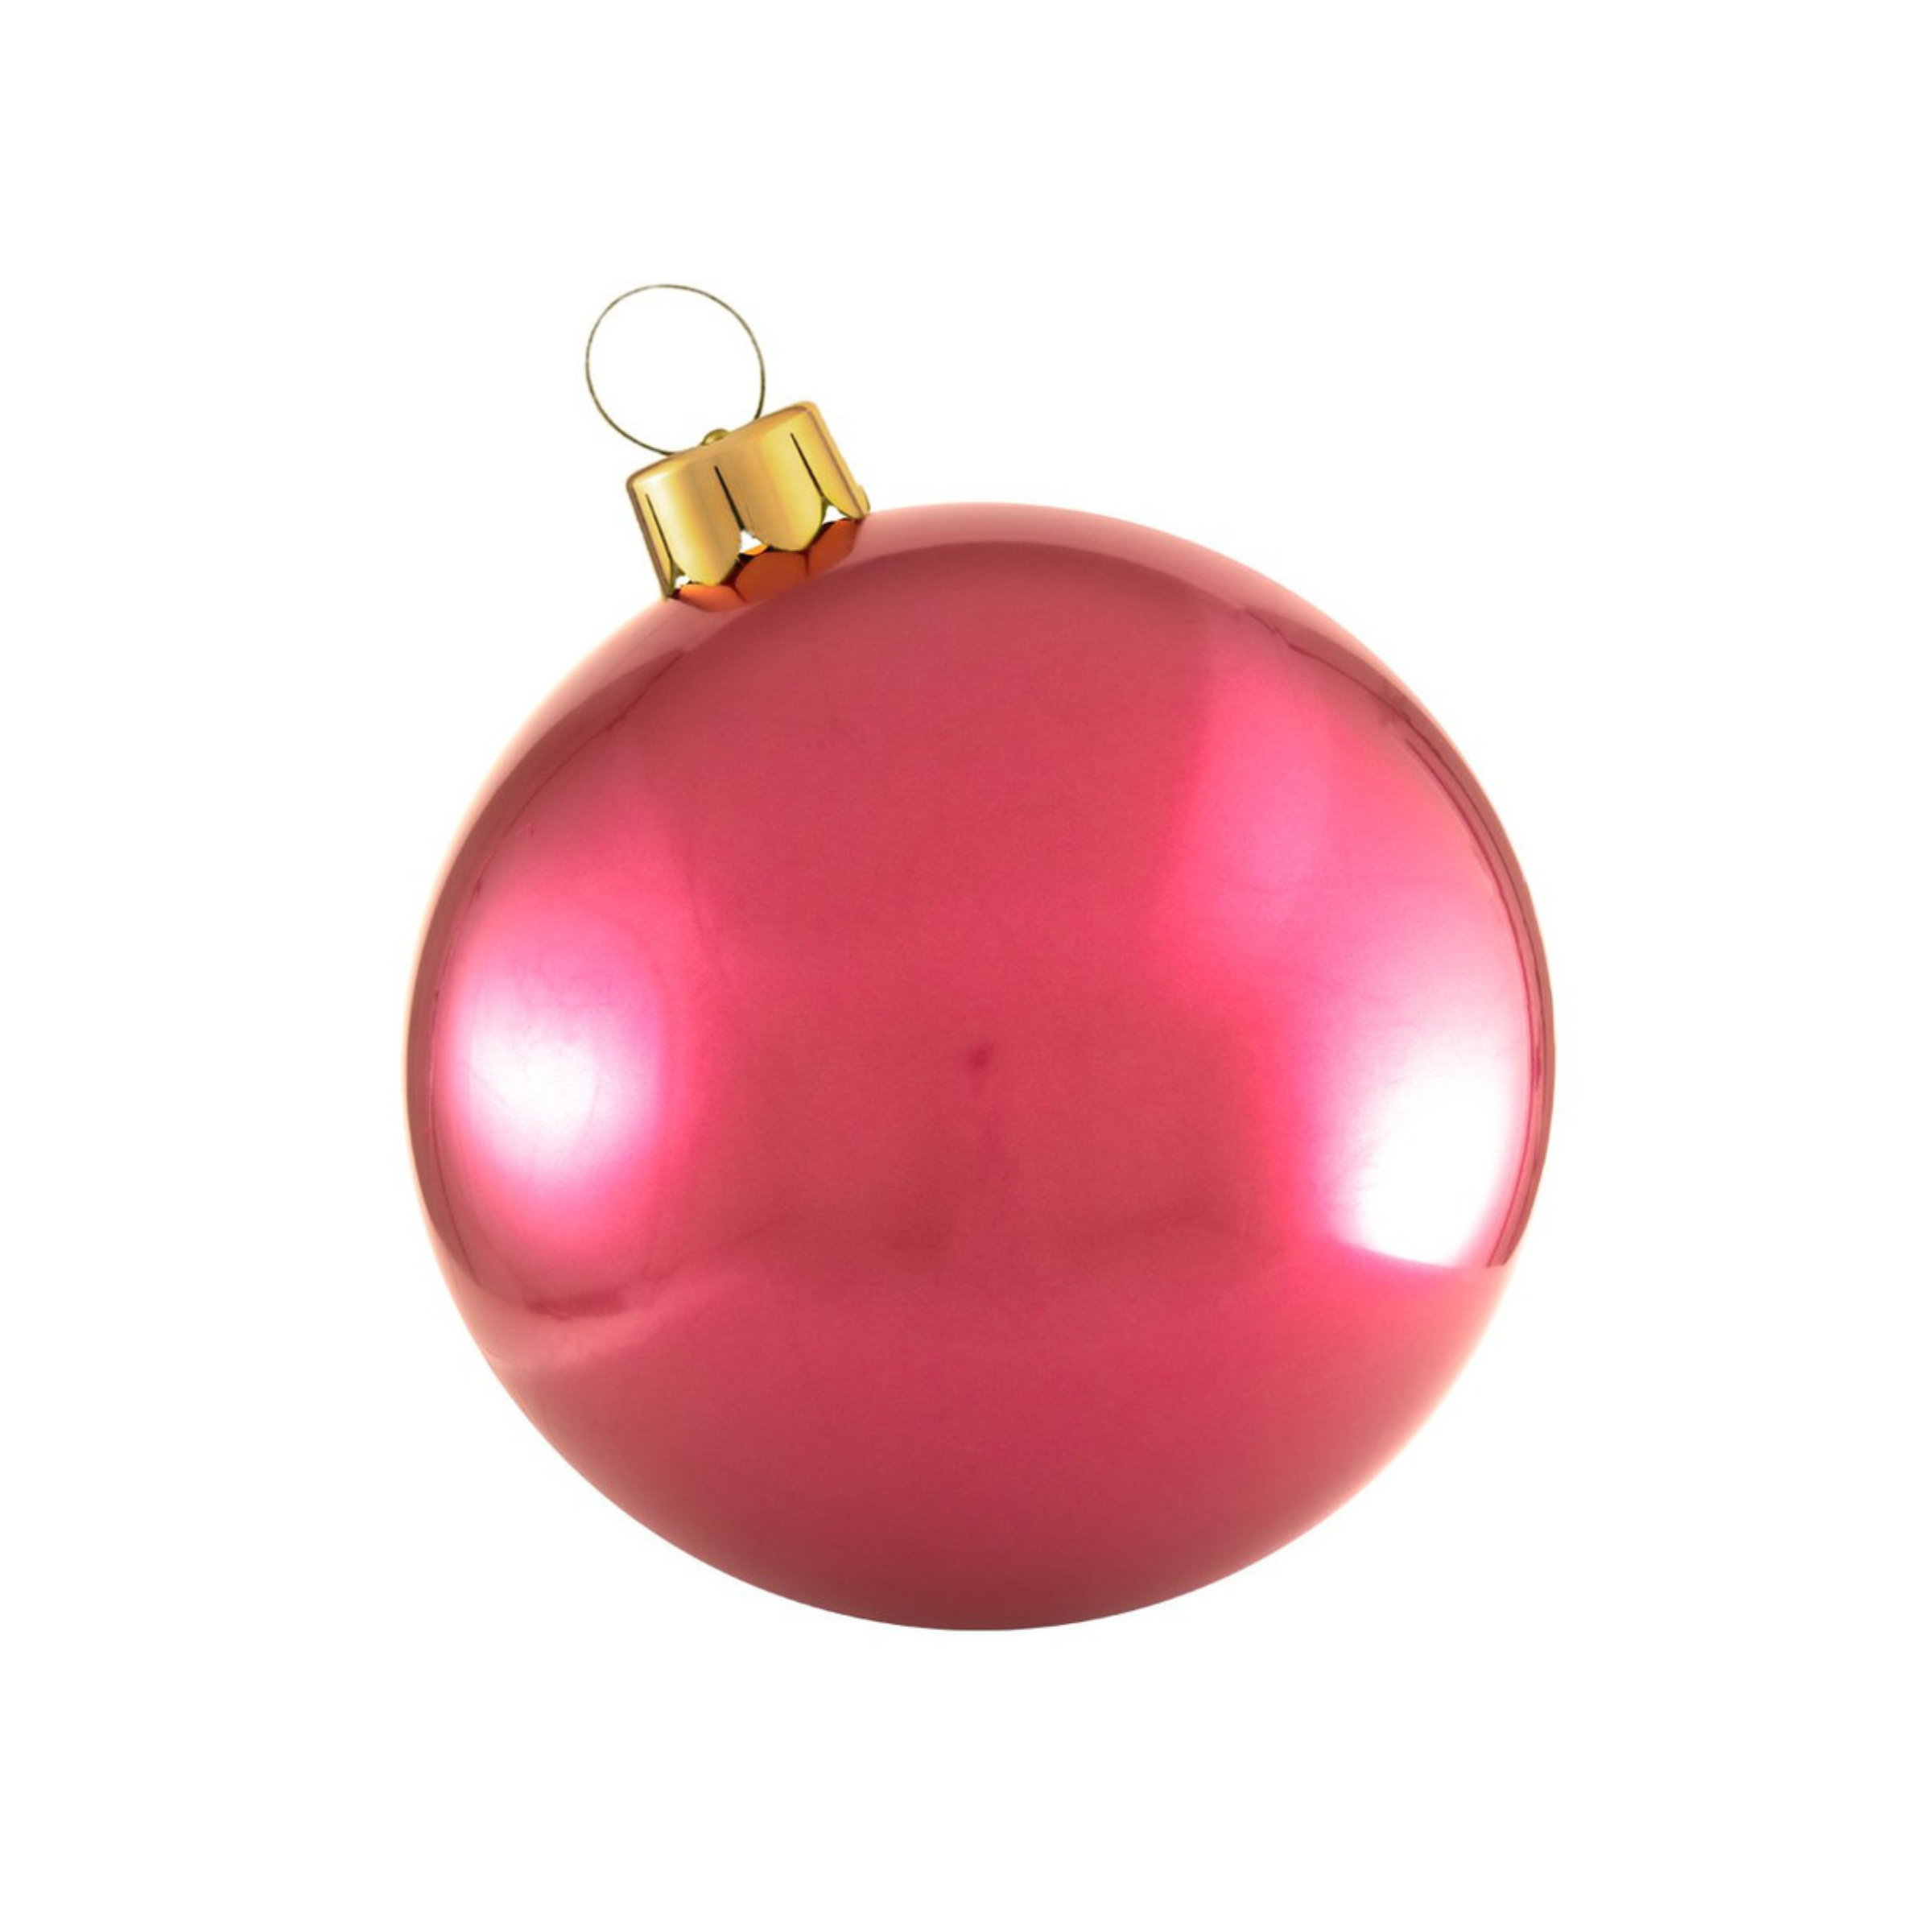 Holiball | 18" Inflatable Ornaments in Various Colors - Giddy Up Glamour Boutique